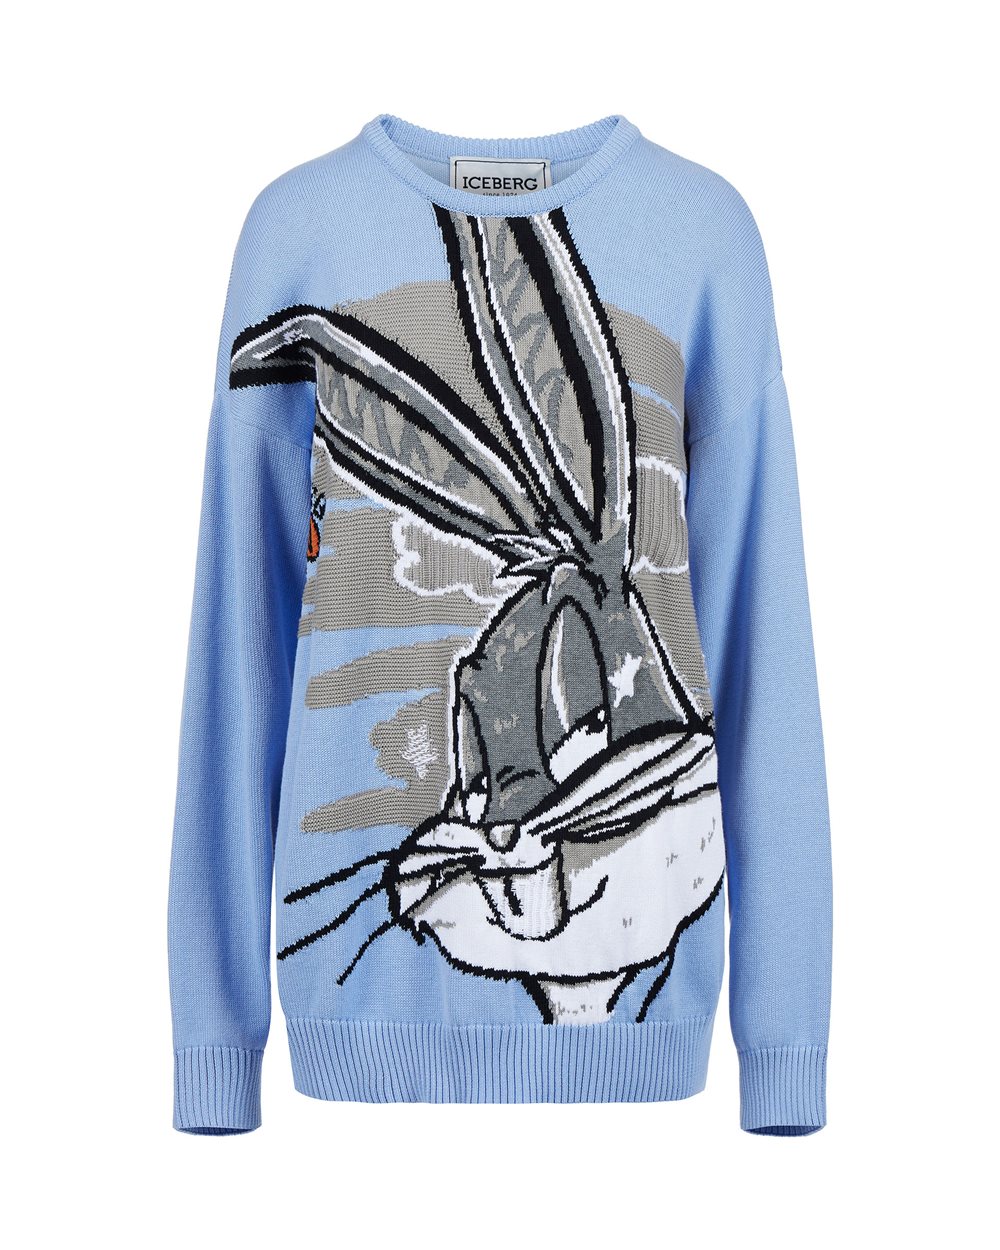 Sweater with cartoon graphics and logo - Clothing | Iceberg - Official Website